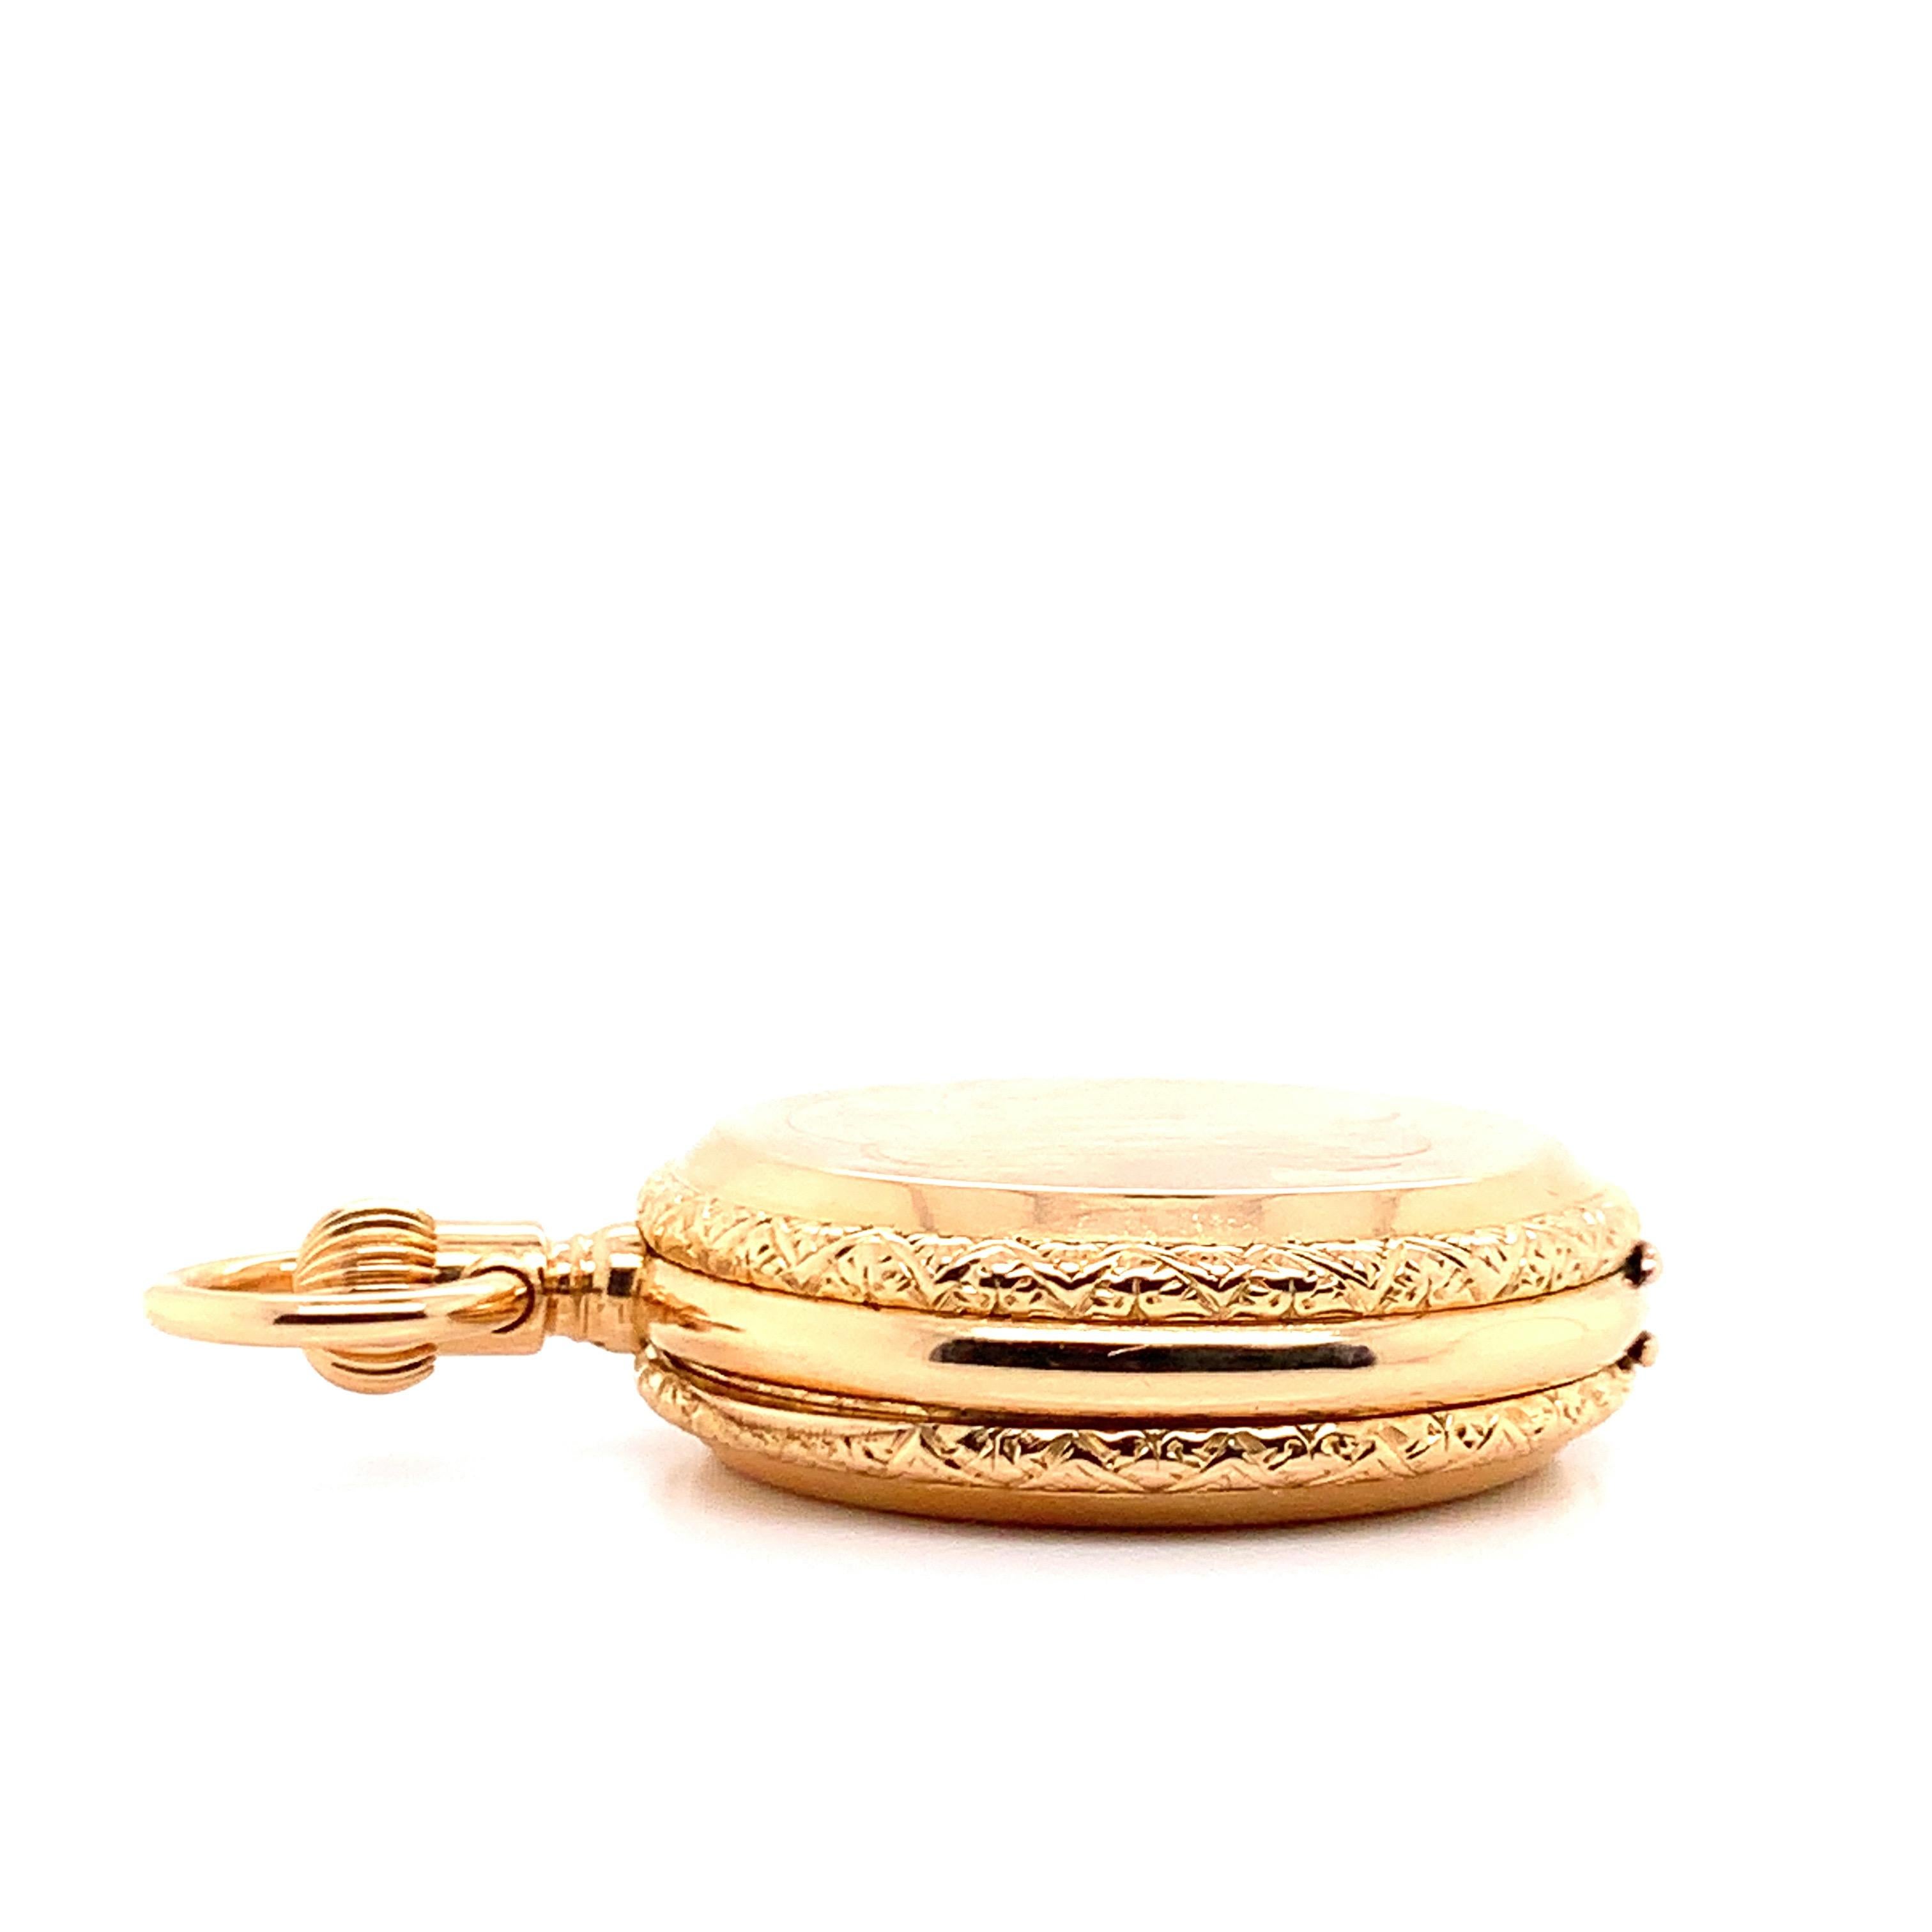 Tiffany & Co. Gold Pocket Watch For Sale 3